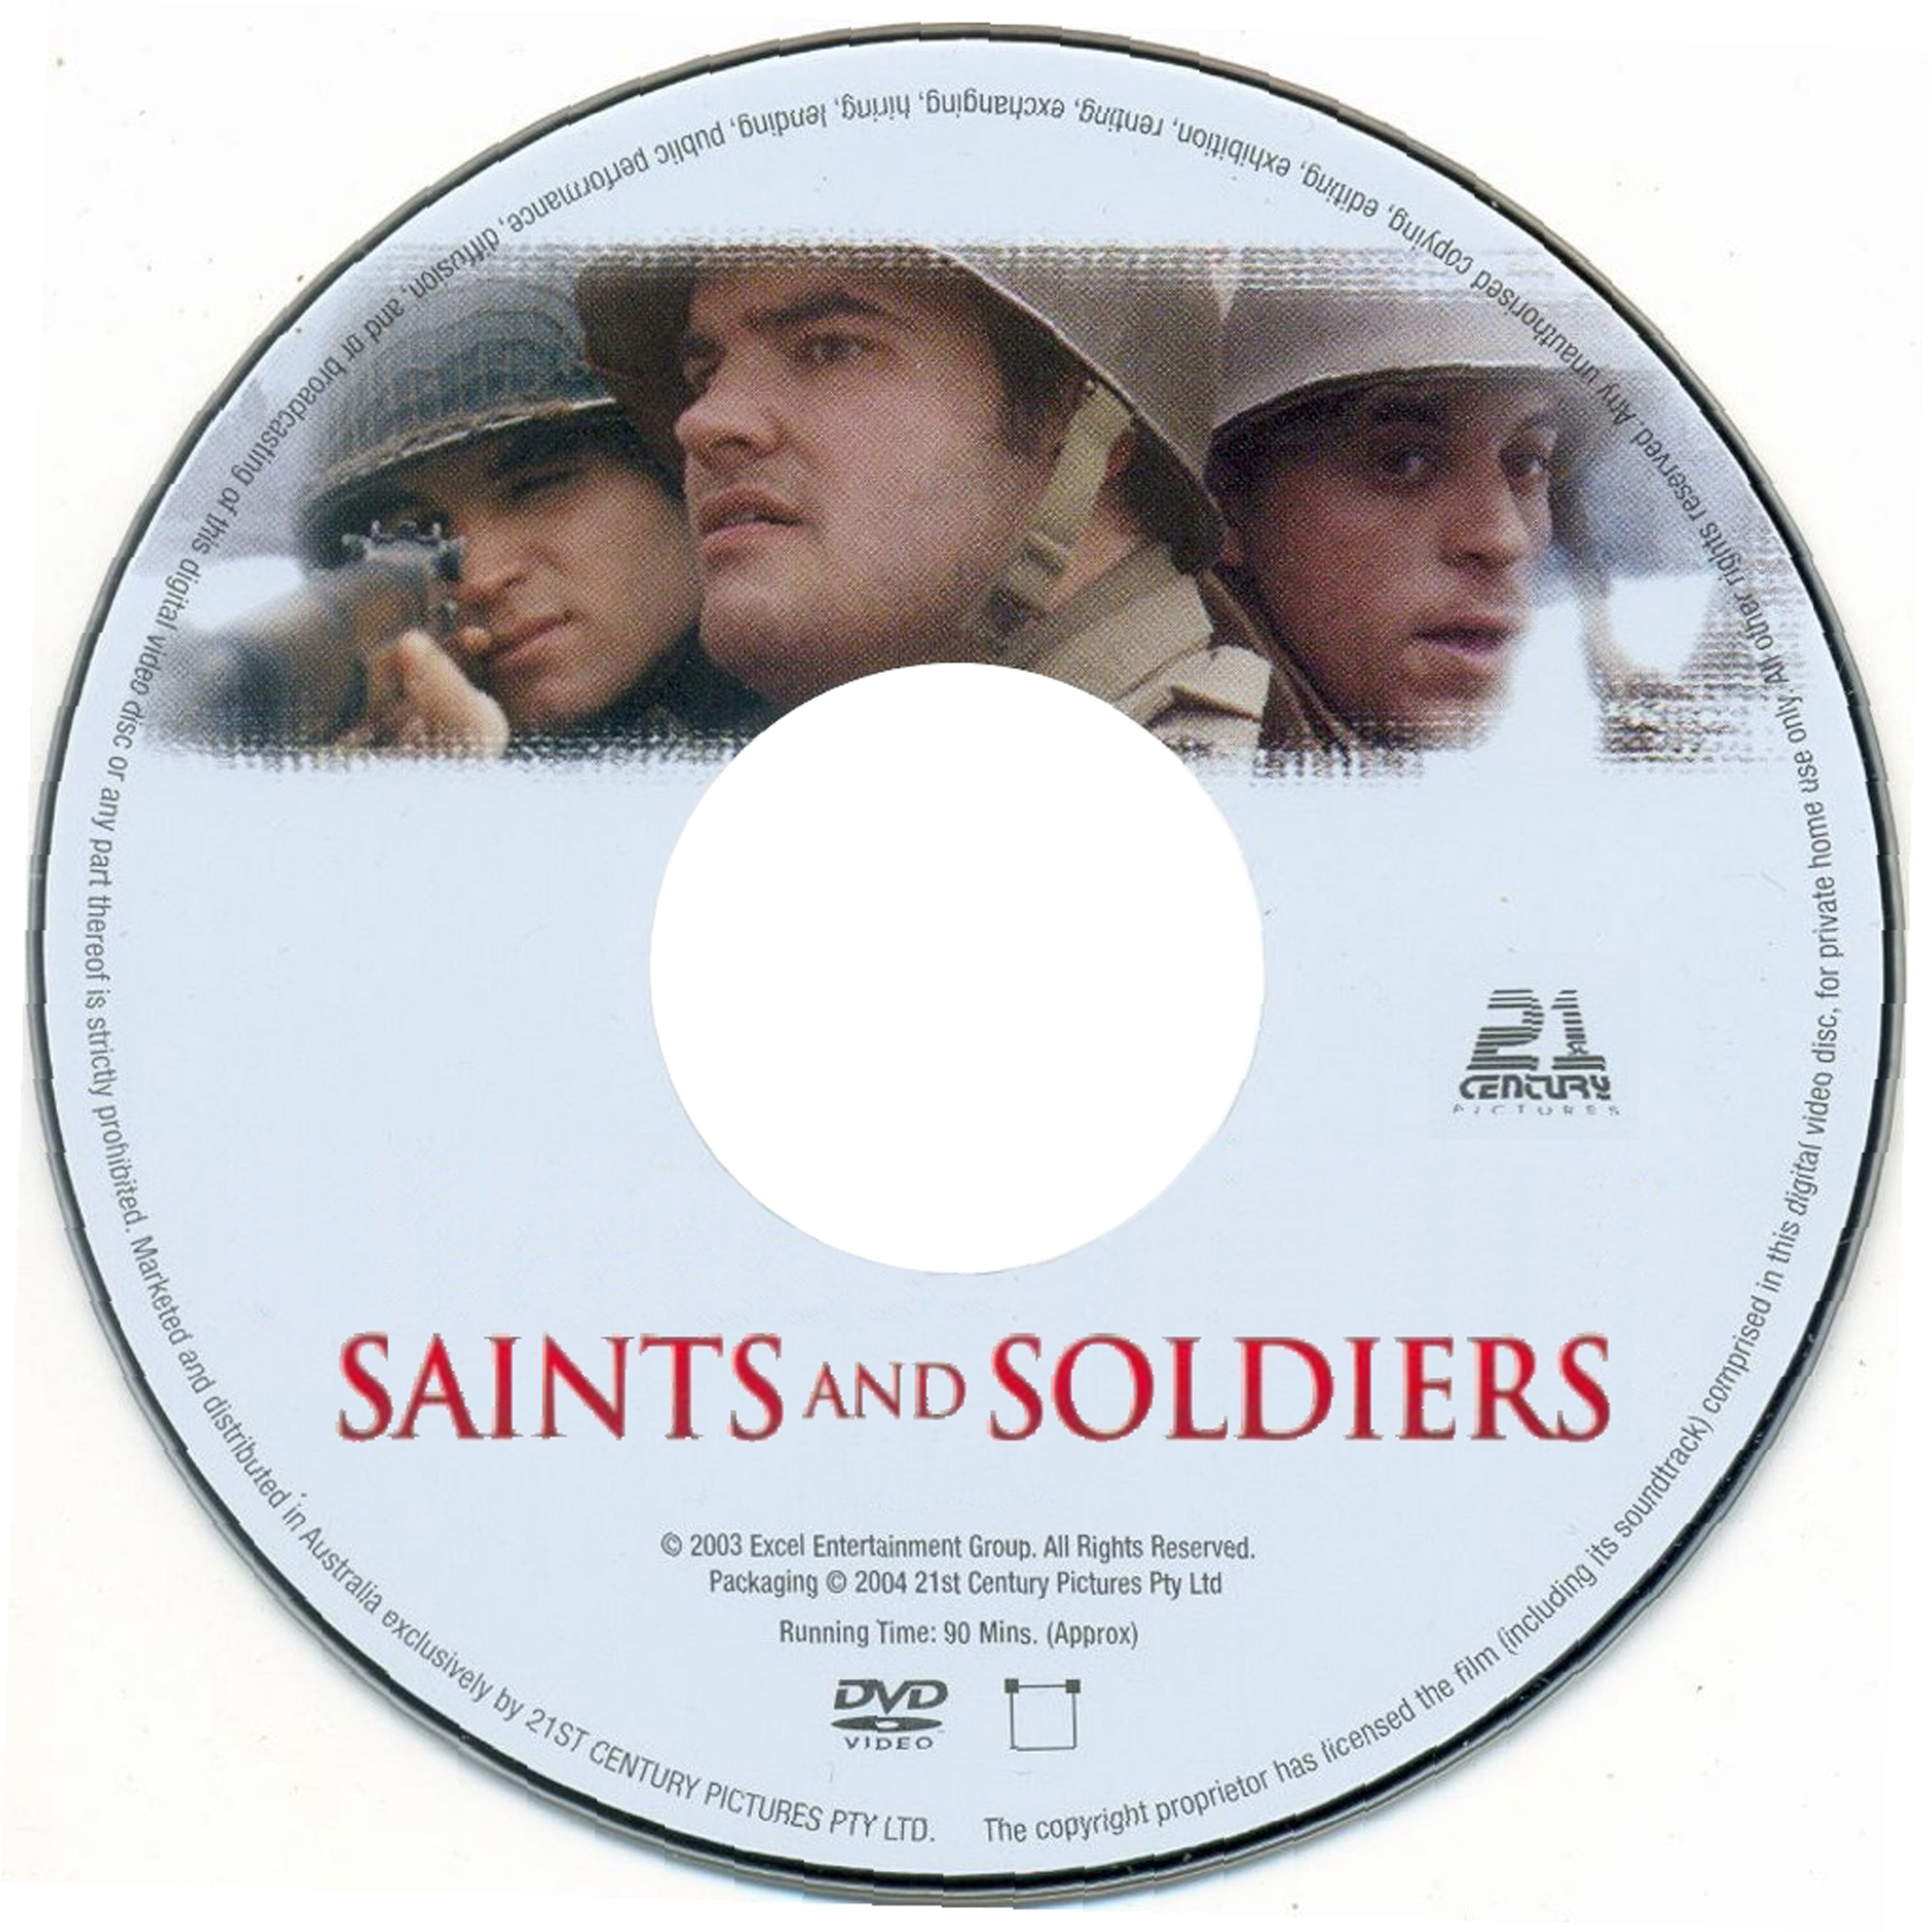 Saint and soldiers